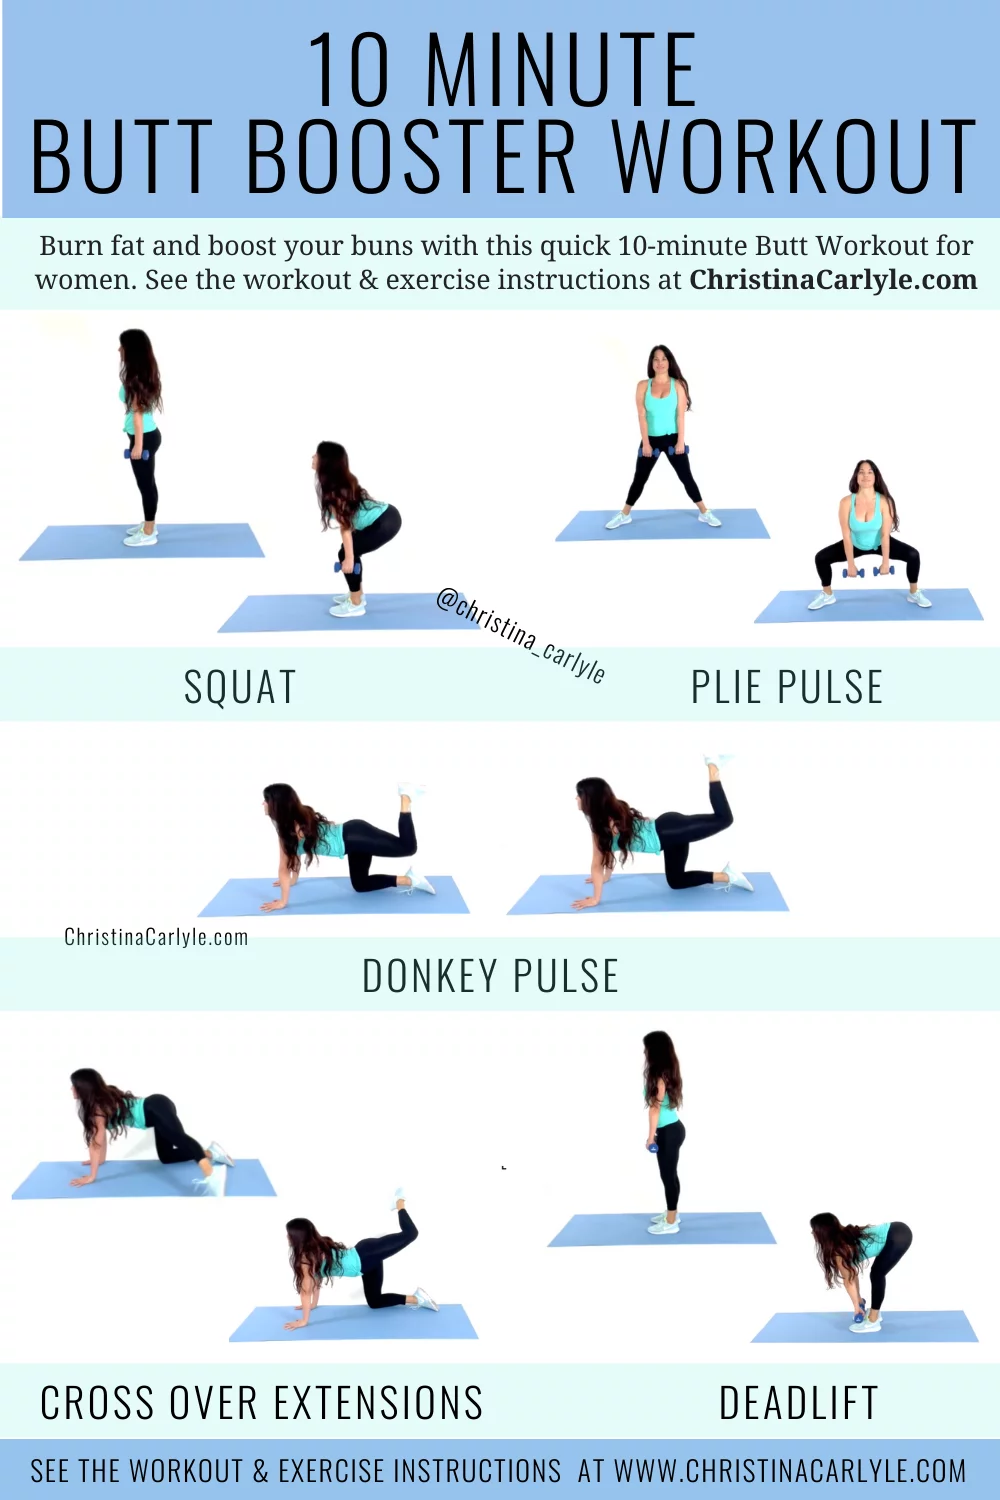 10-minute butt workout at home